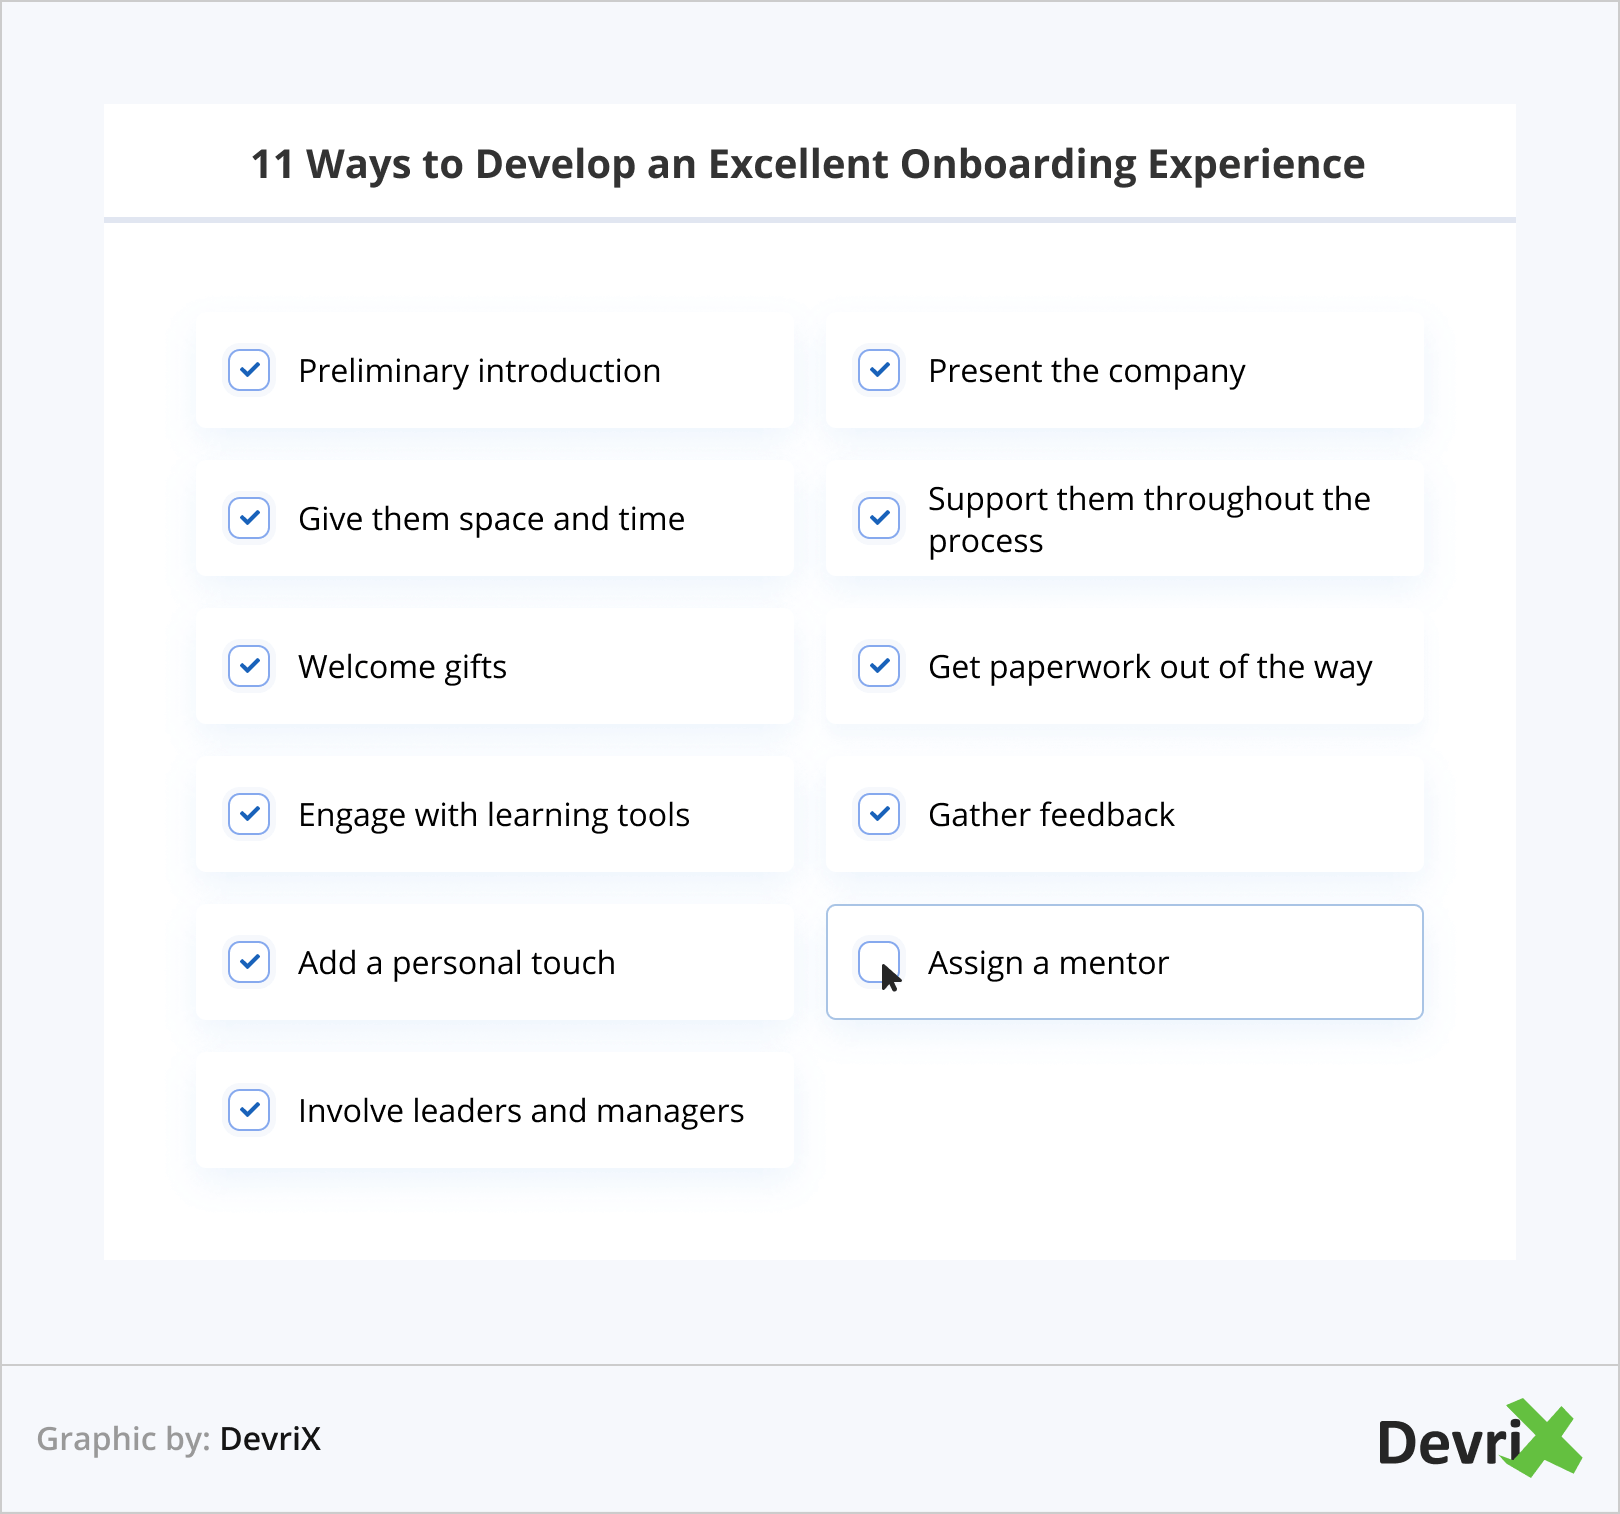 11 Ways to Develop an Excellent Onboarding Experience